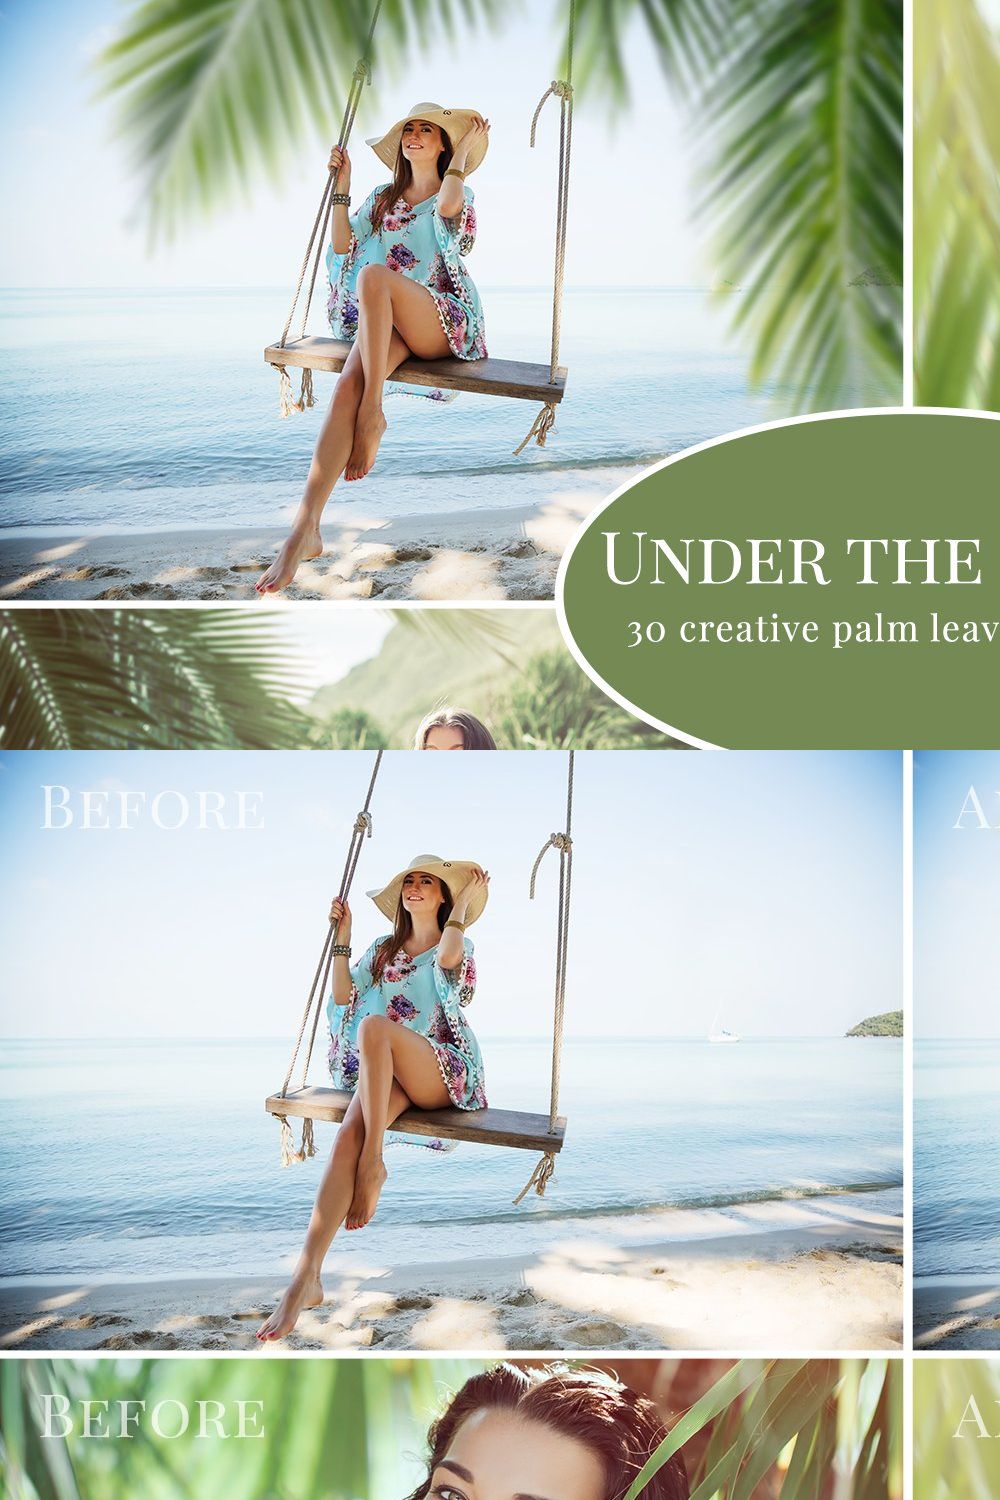 Under the Palms photo overlays pinterest preview image.